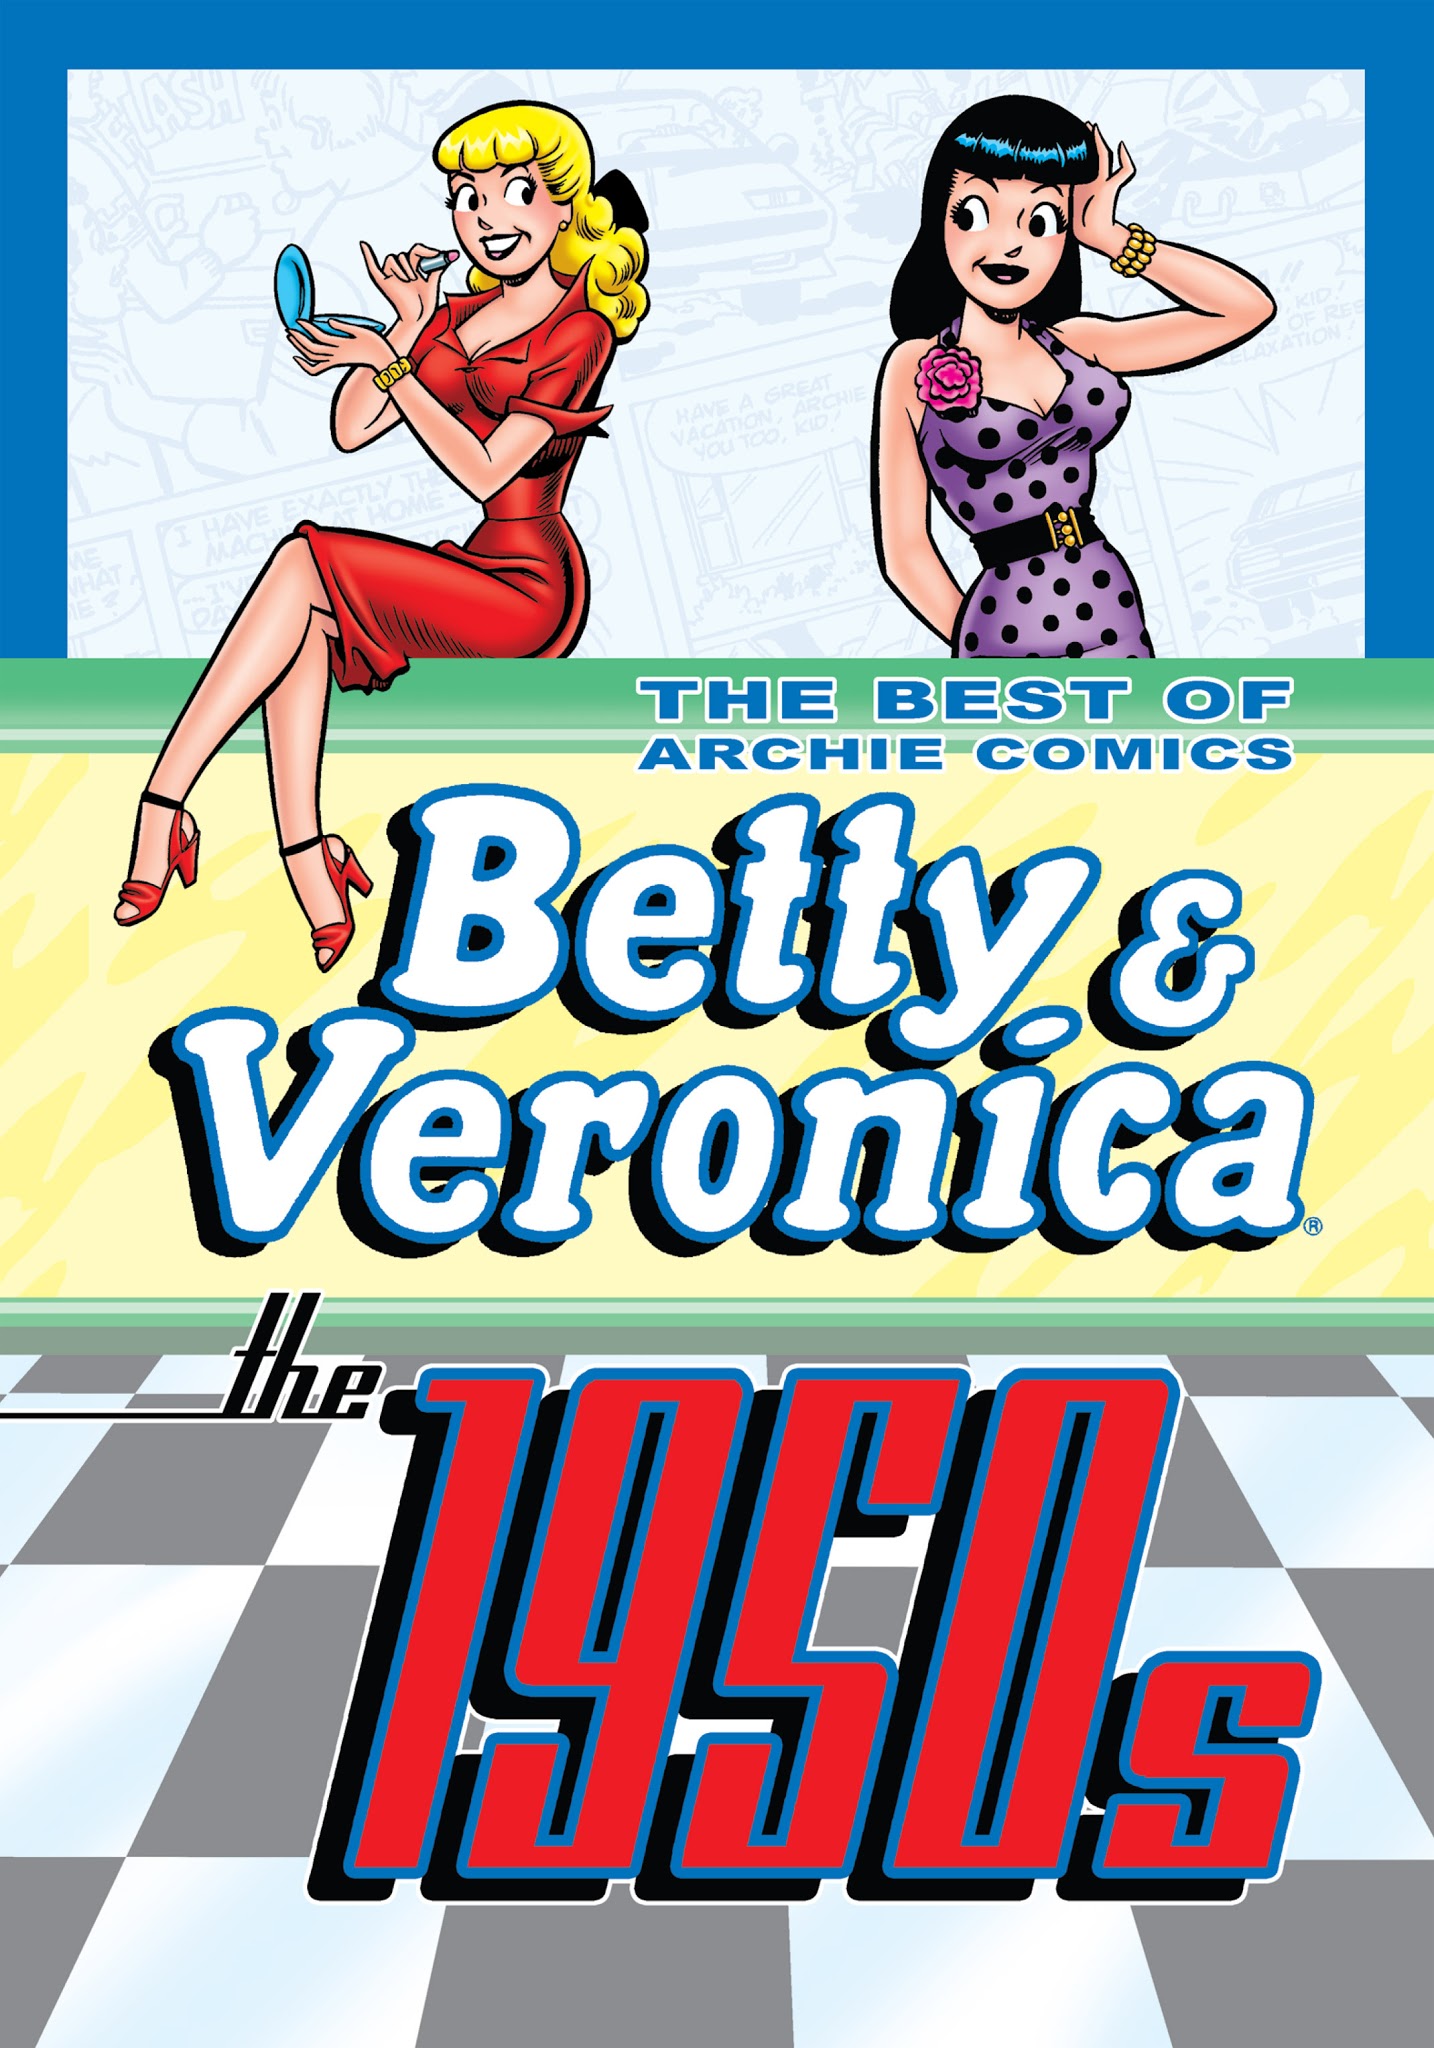 Read online The Best of Archie Comics: Betty & Veronica comic -  Issue # TPB - 60